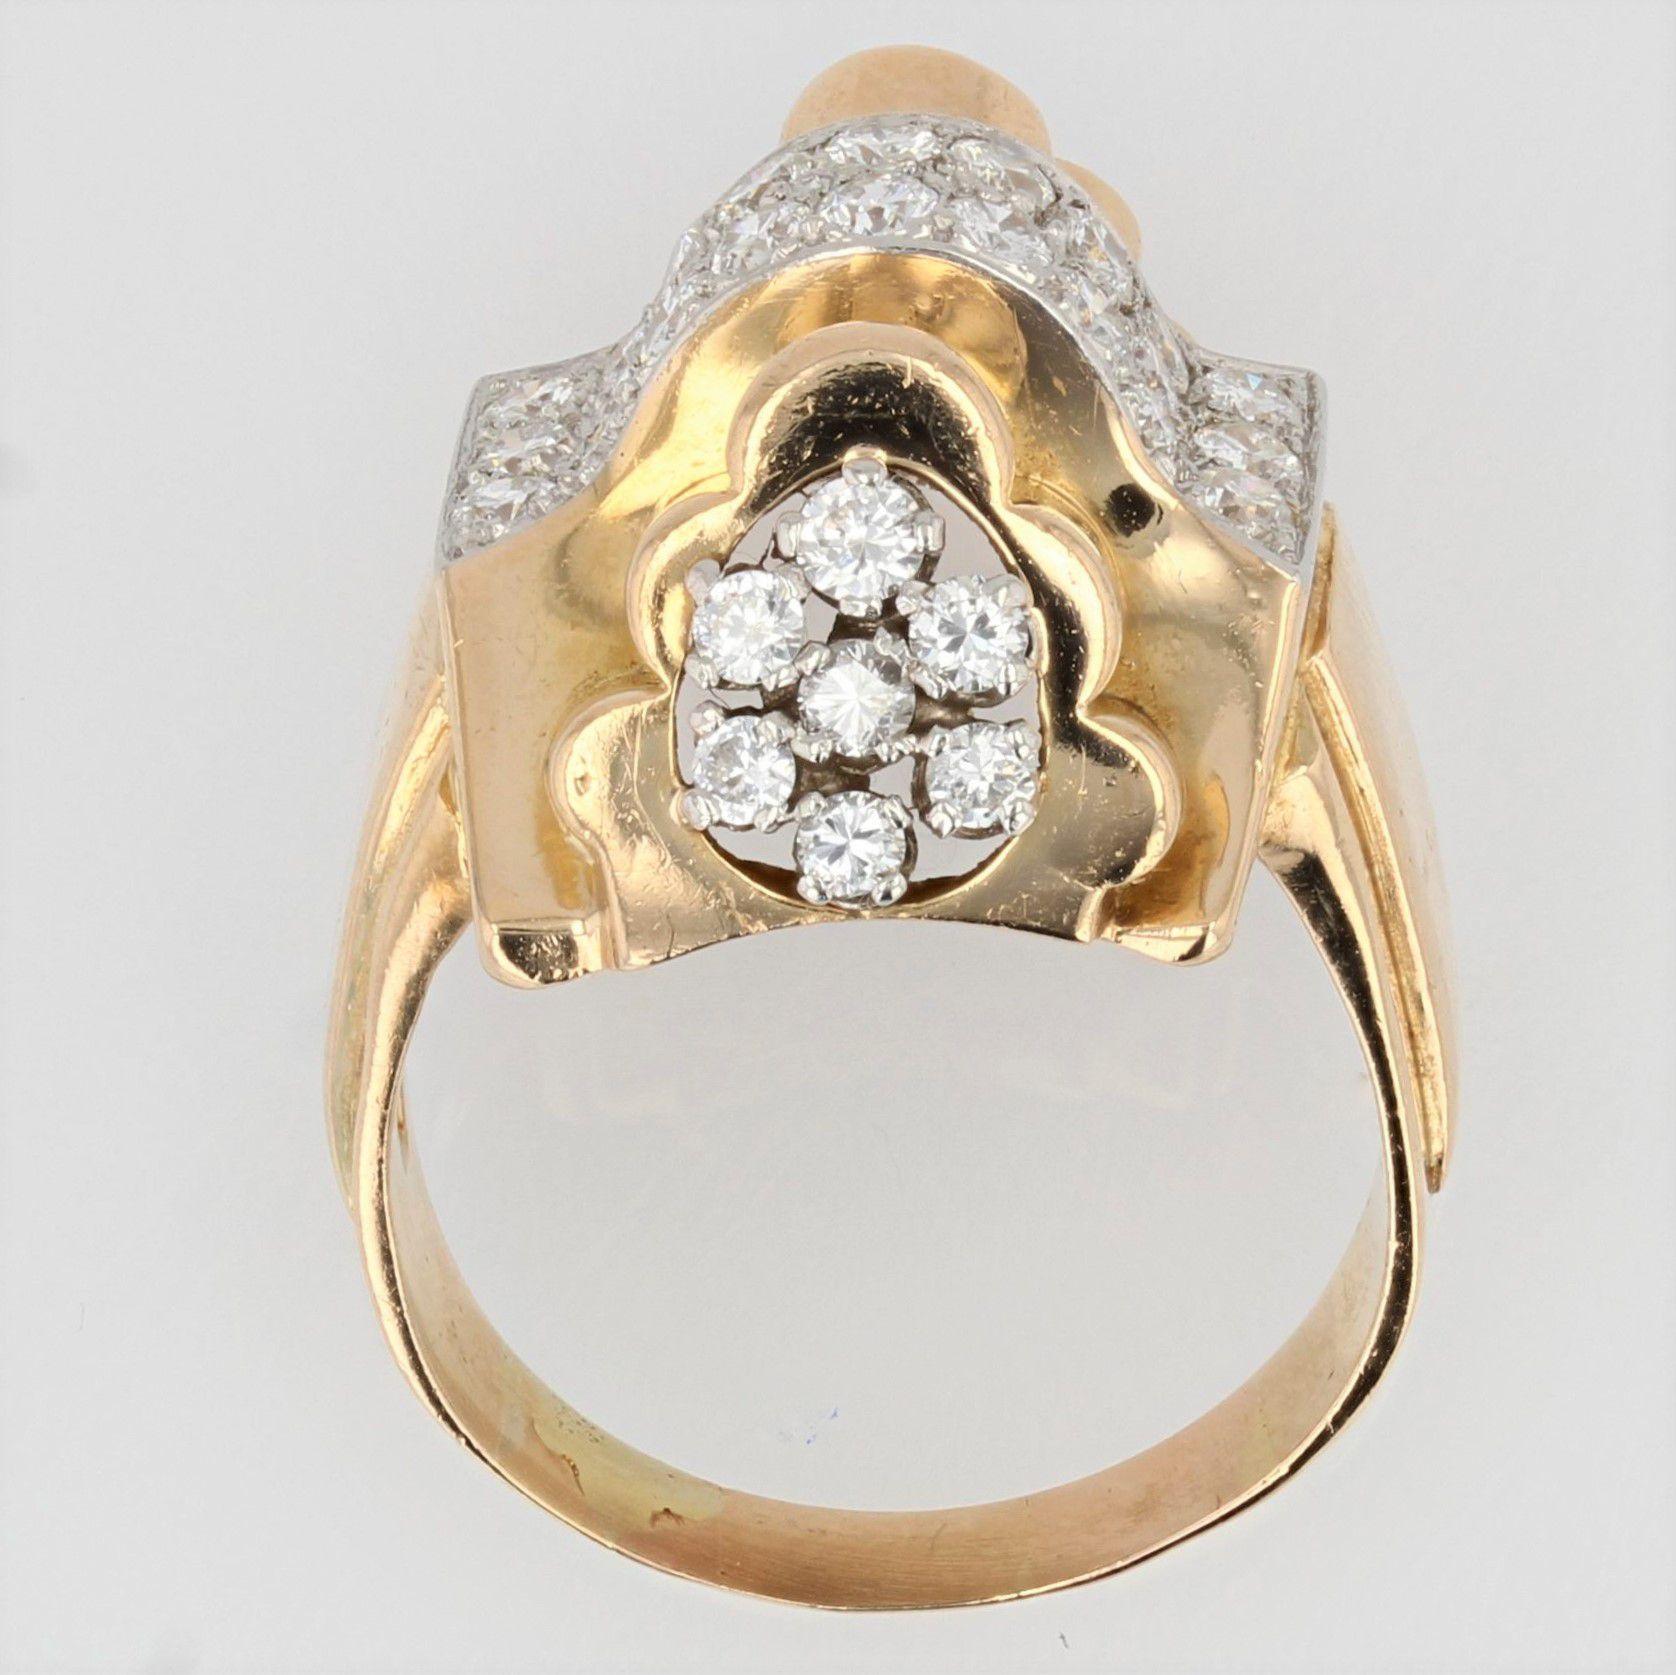 French 1940s Diamonds 18 Karat Yellow Gold Knot Tank Ring For Sale 1